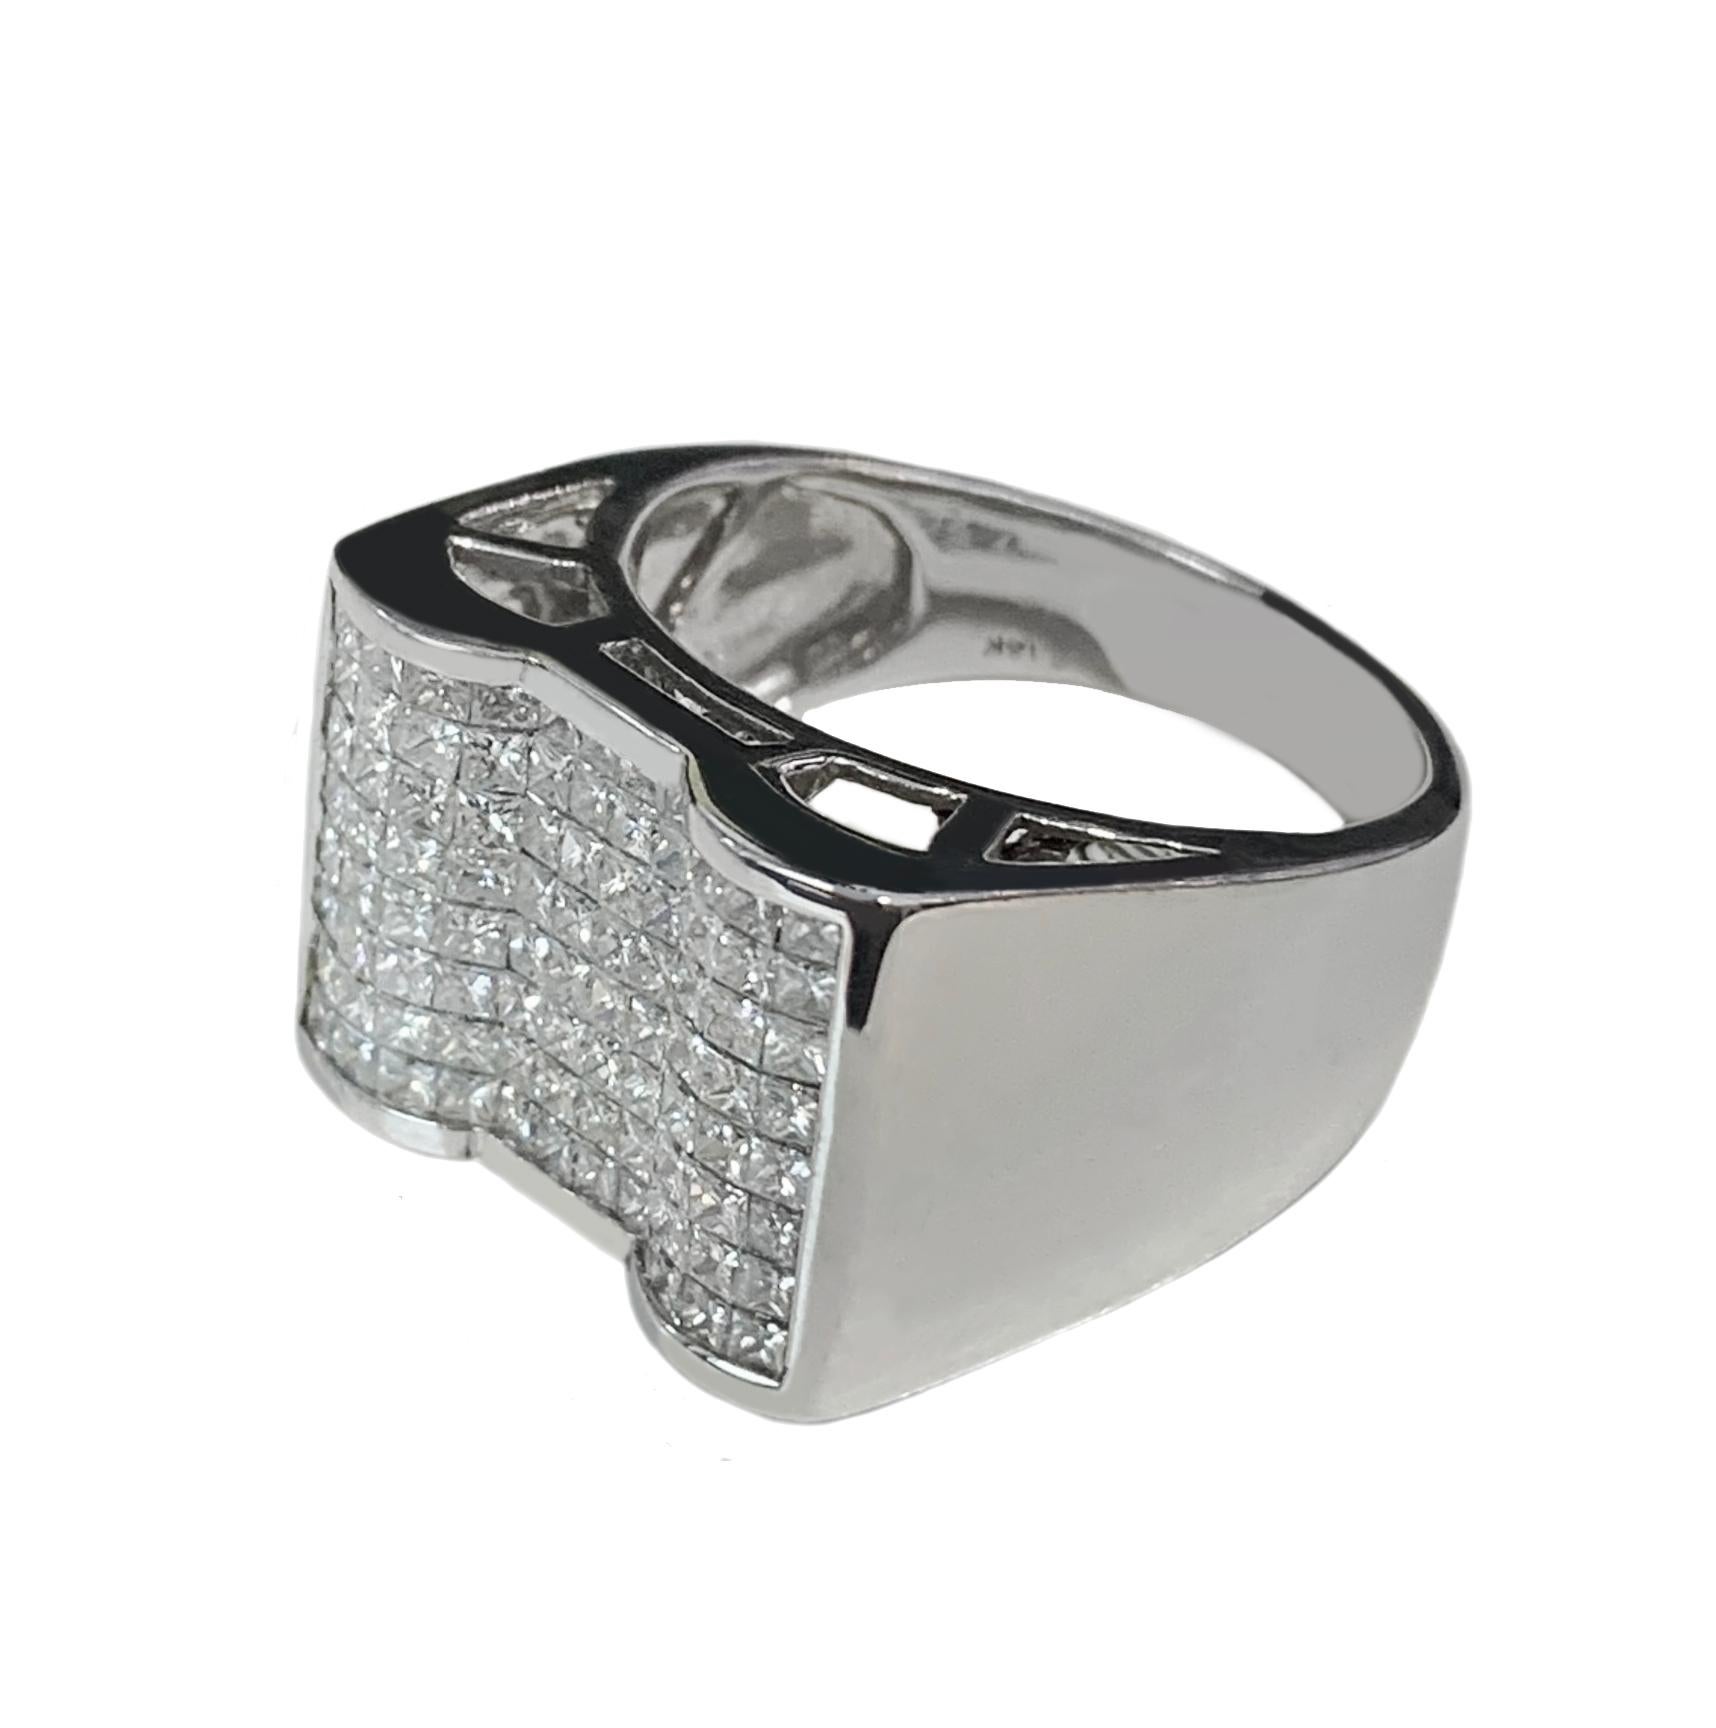 -Custom made

-14k White gold

-Ring size: 10.5

-Weight: 14.5gr

-Width: 0.6”

-Diamonds: 3.50ct, VS clarity, G color